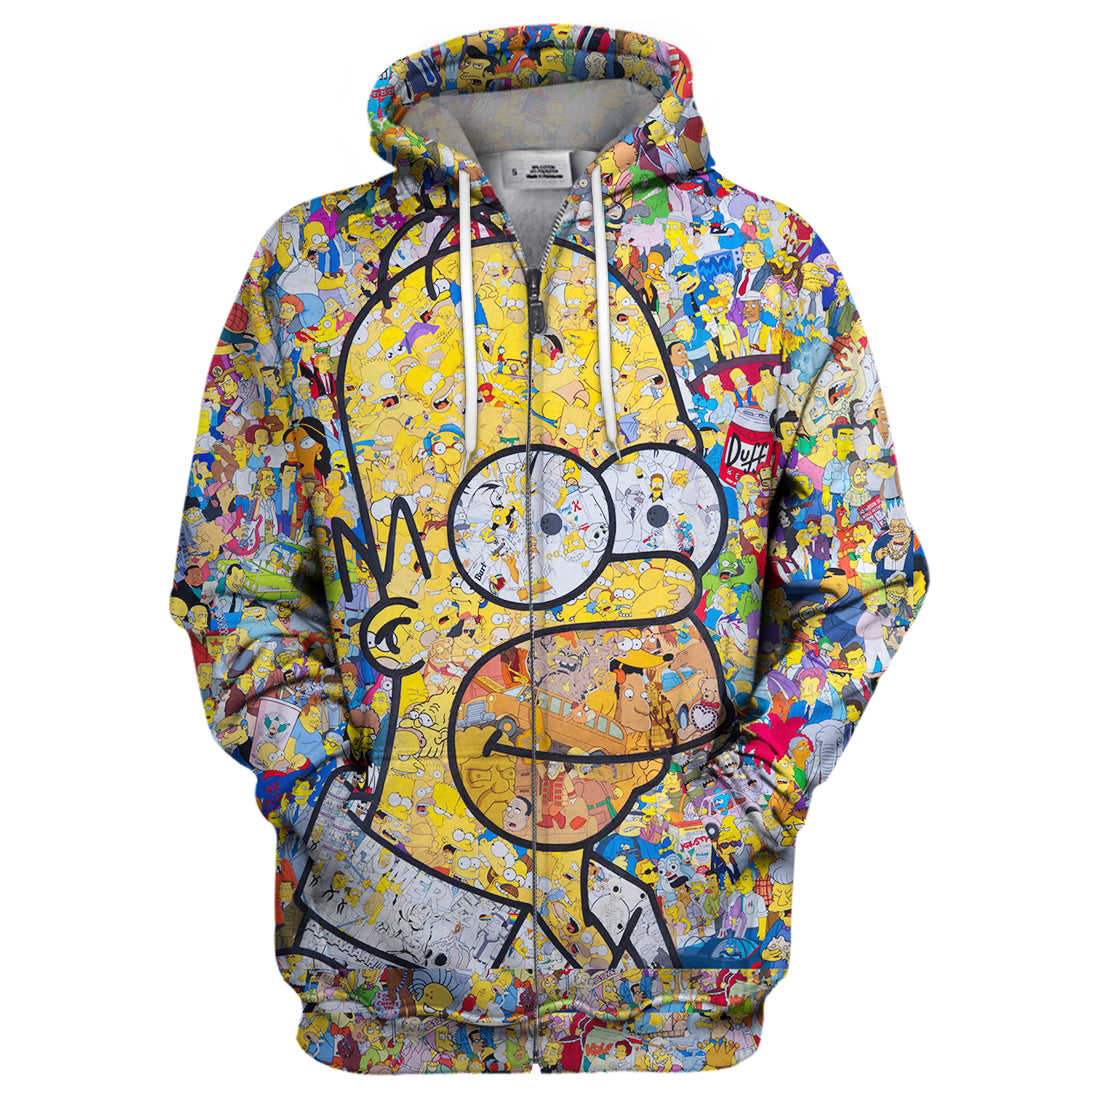 Unifinz The Simpsons Hoodie The Simpsons Art 3D Print T-shirt Awesome The Simpsons Shirt Sweater Tank 2023